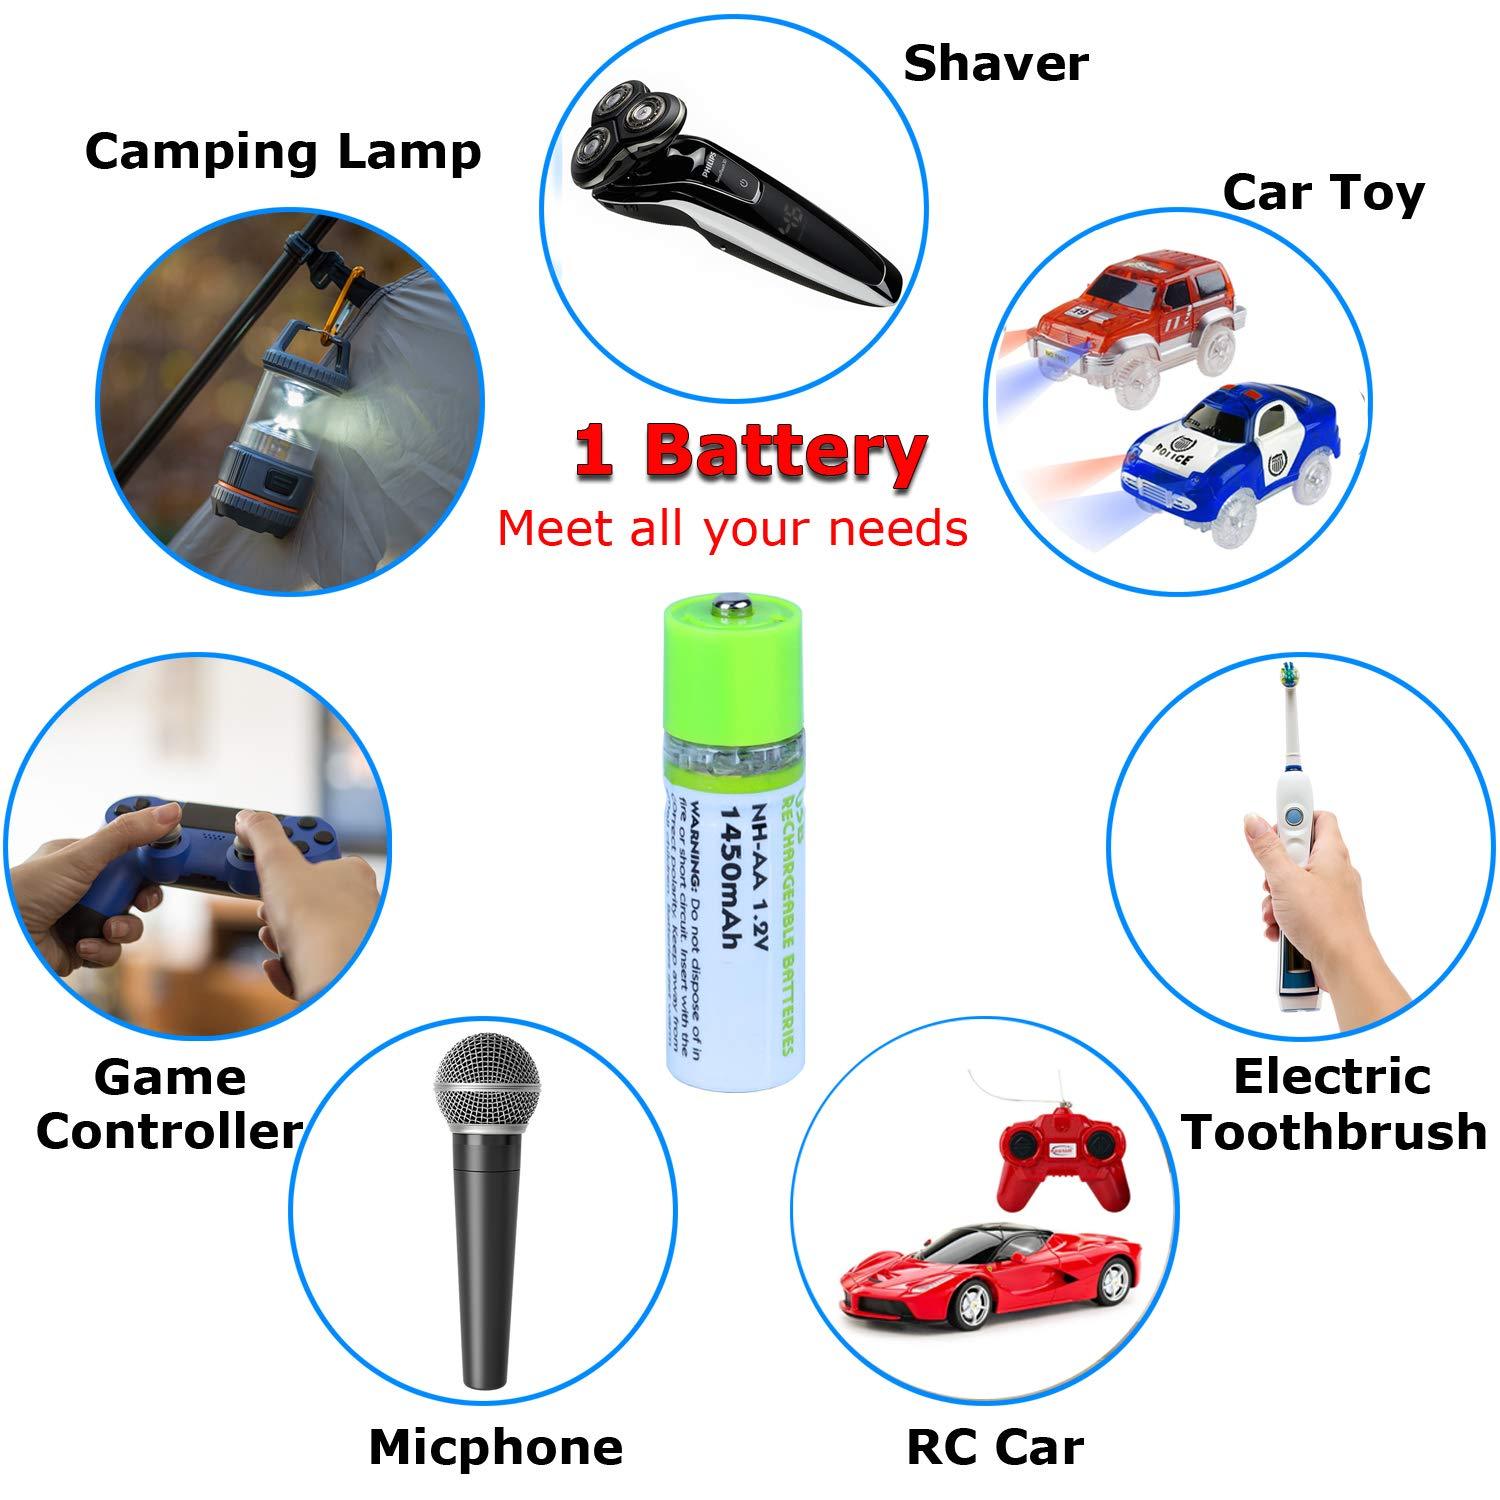 EASYPOWER Usb Rechargeable AA Batteries--$9.99 ONLY FOR TODAY